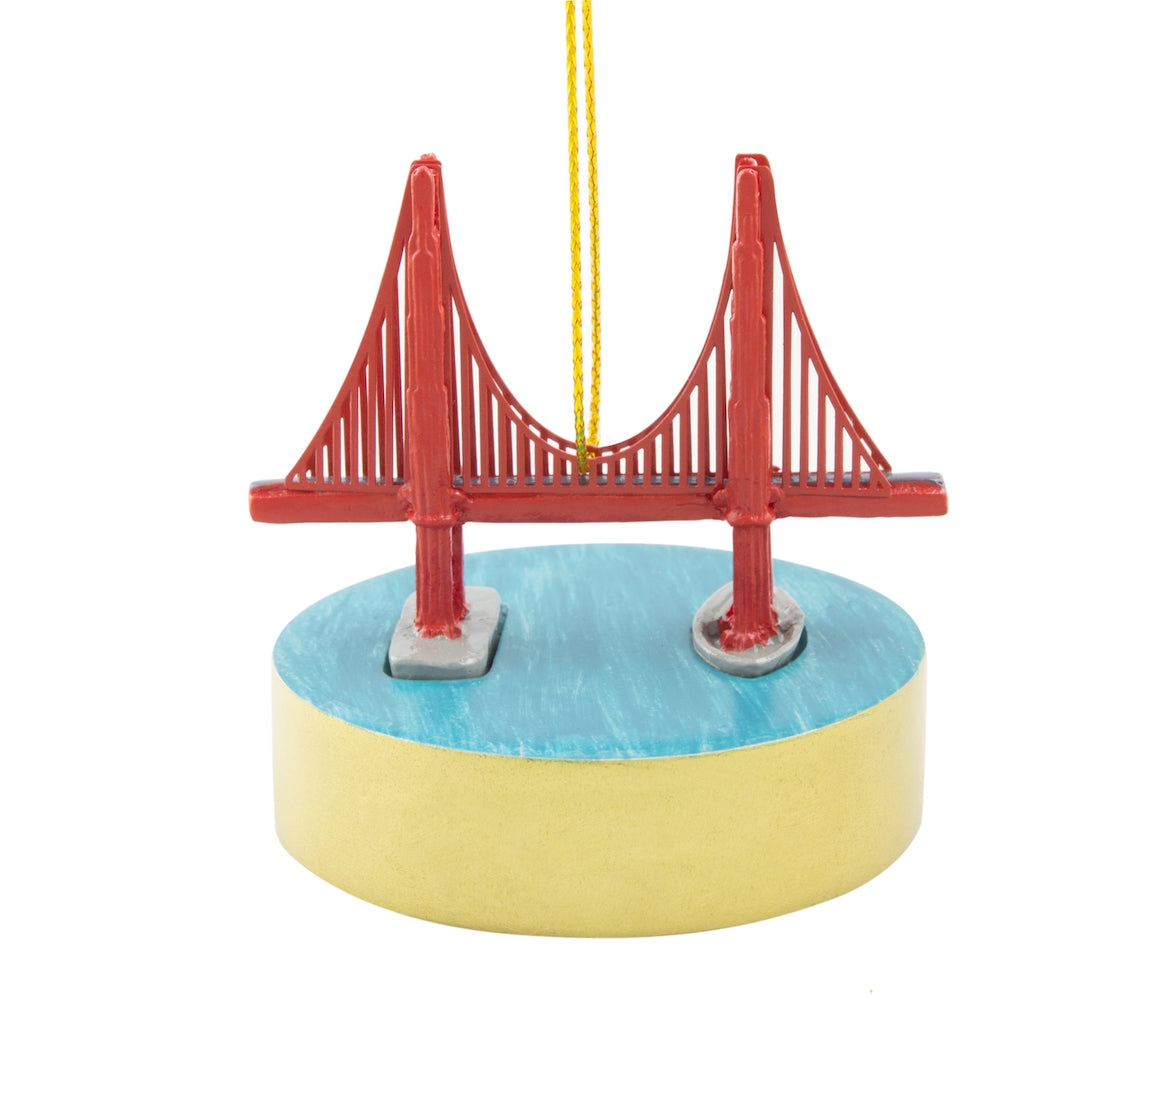 Hand-painted resin Golden Gate Bridge model ornament with gold thread ribbon.